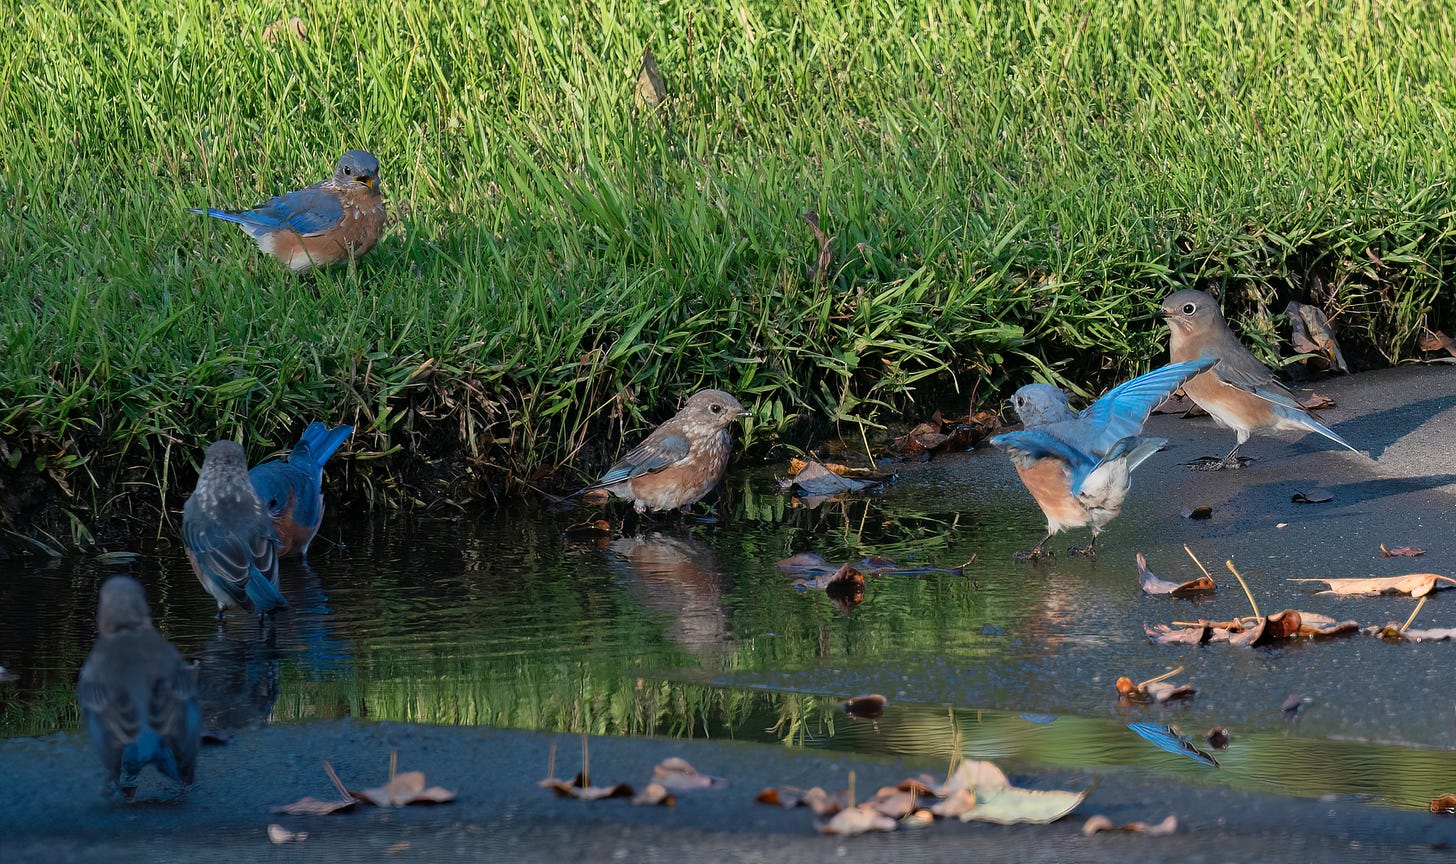 A flock of Bluebirds splashing in a puddle on a driveway